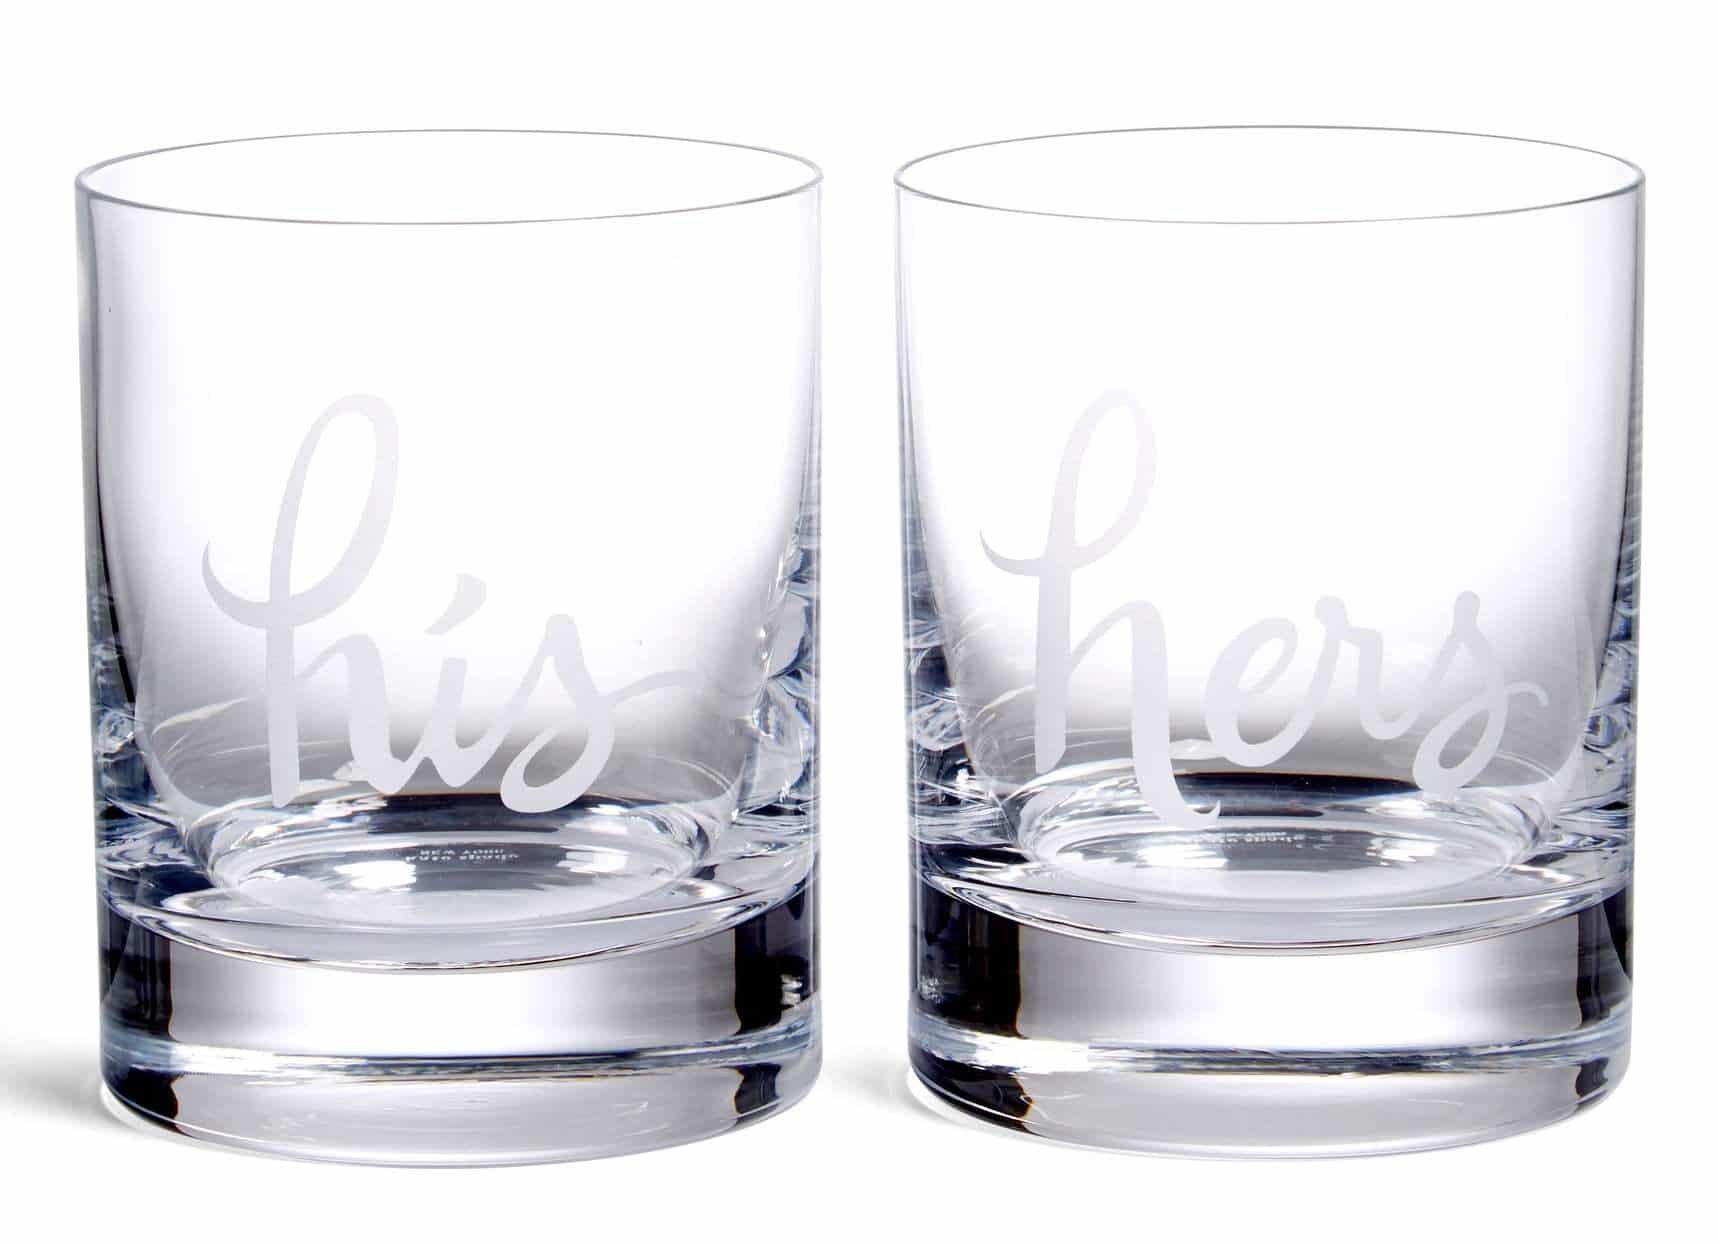 Gifts for Couples 2018: His & Hers Drinking Glasses